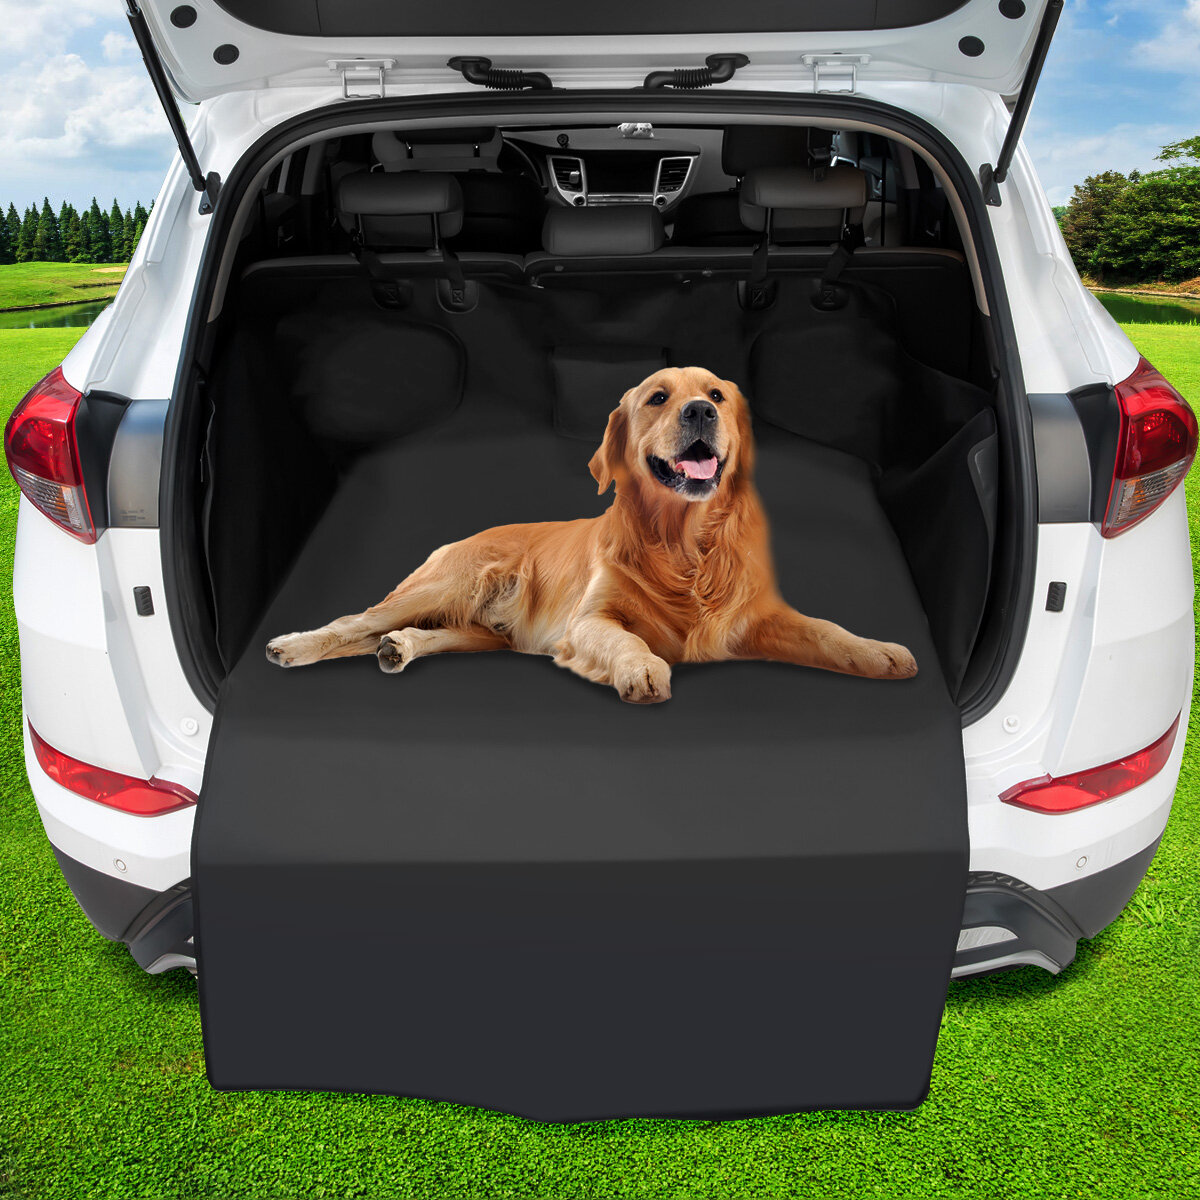 

Dog Car Seat Cover for Pet Travel Puppy Supplies Cat Carrier Hammock Rear Back Seat Protector Mat Safety Nonslip Waterpr